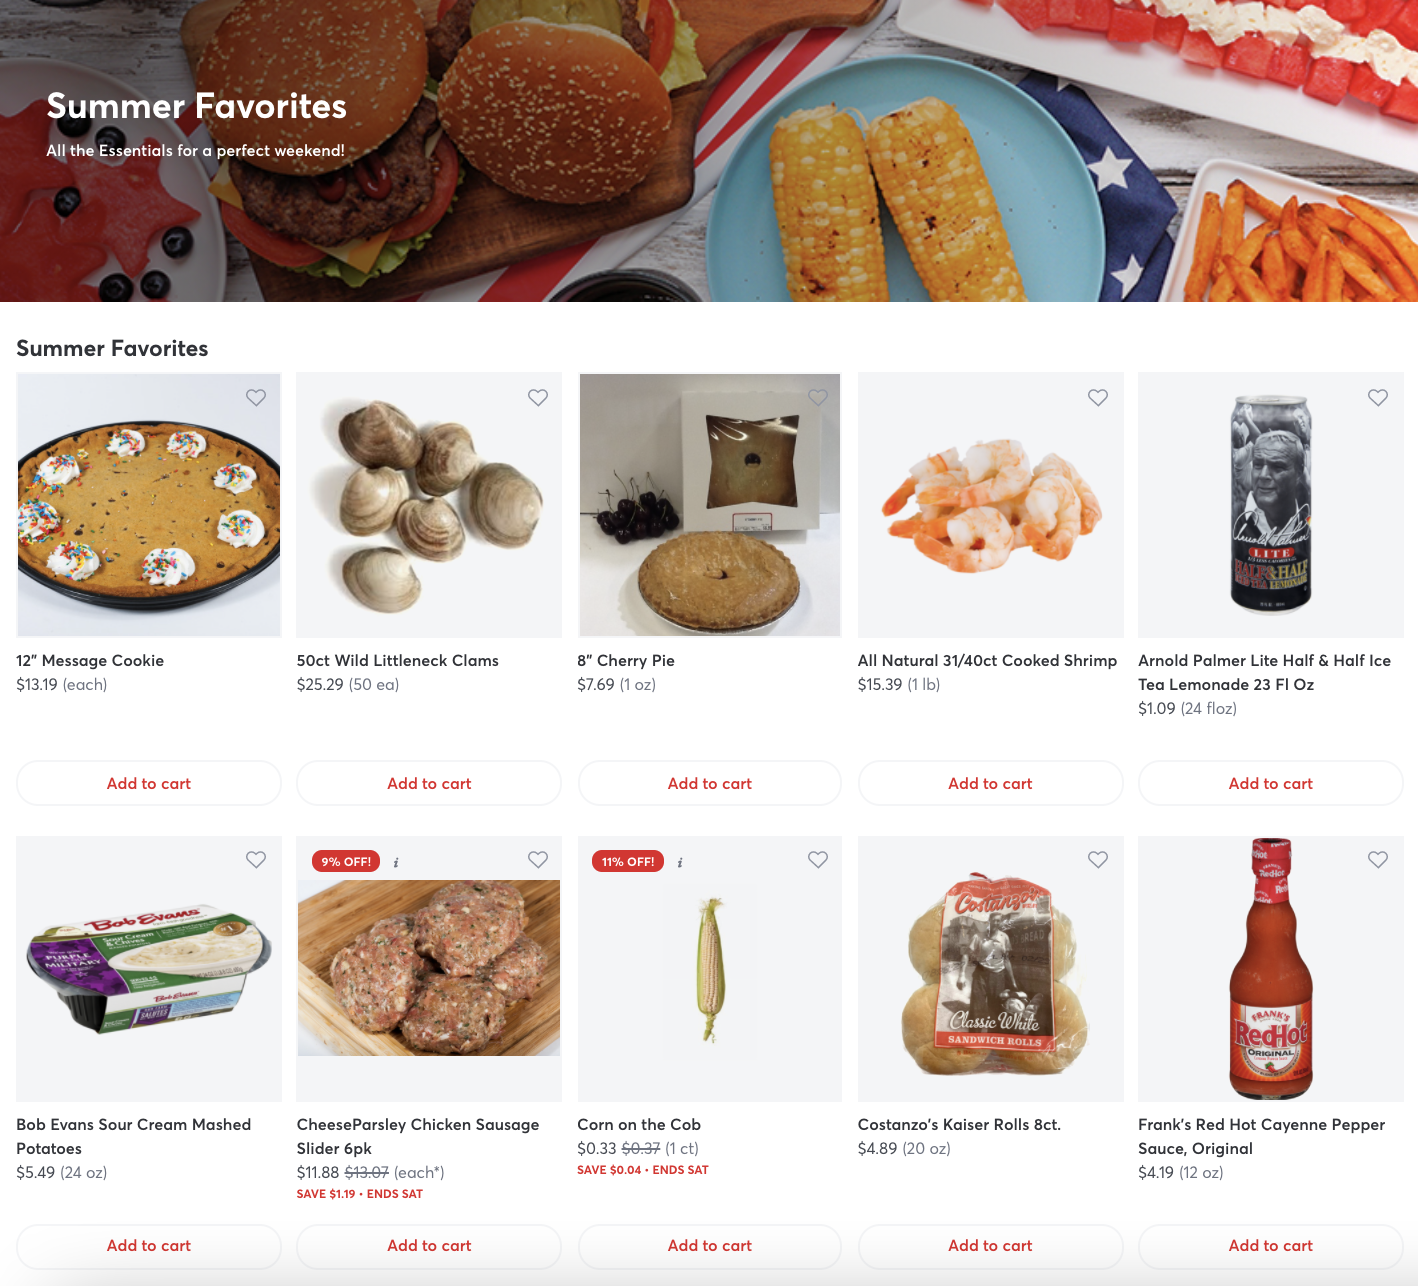 Picture of online grocery store advertising summer products